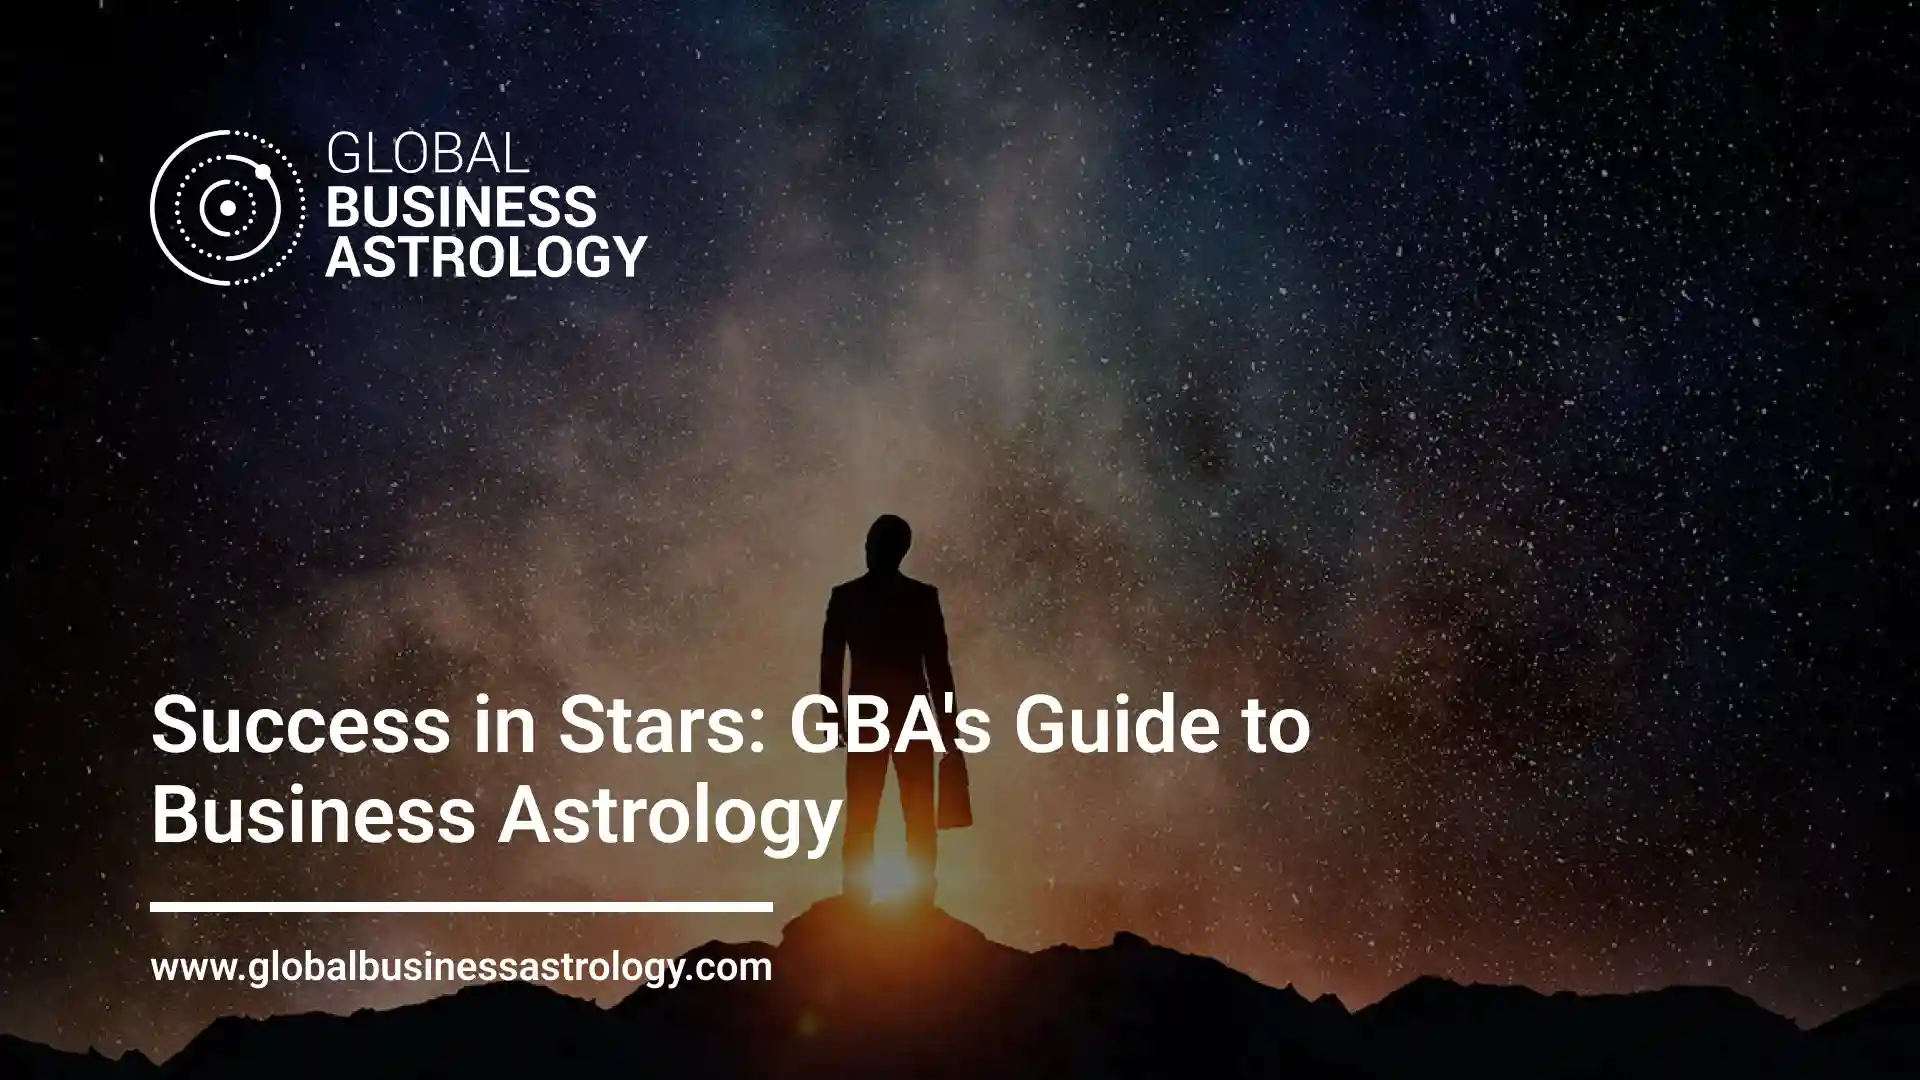 Success in Stars: GBA's Guide to Business Astrology